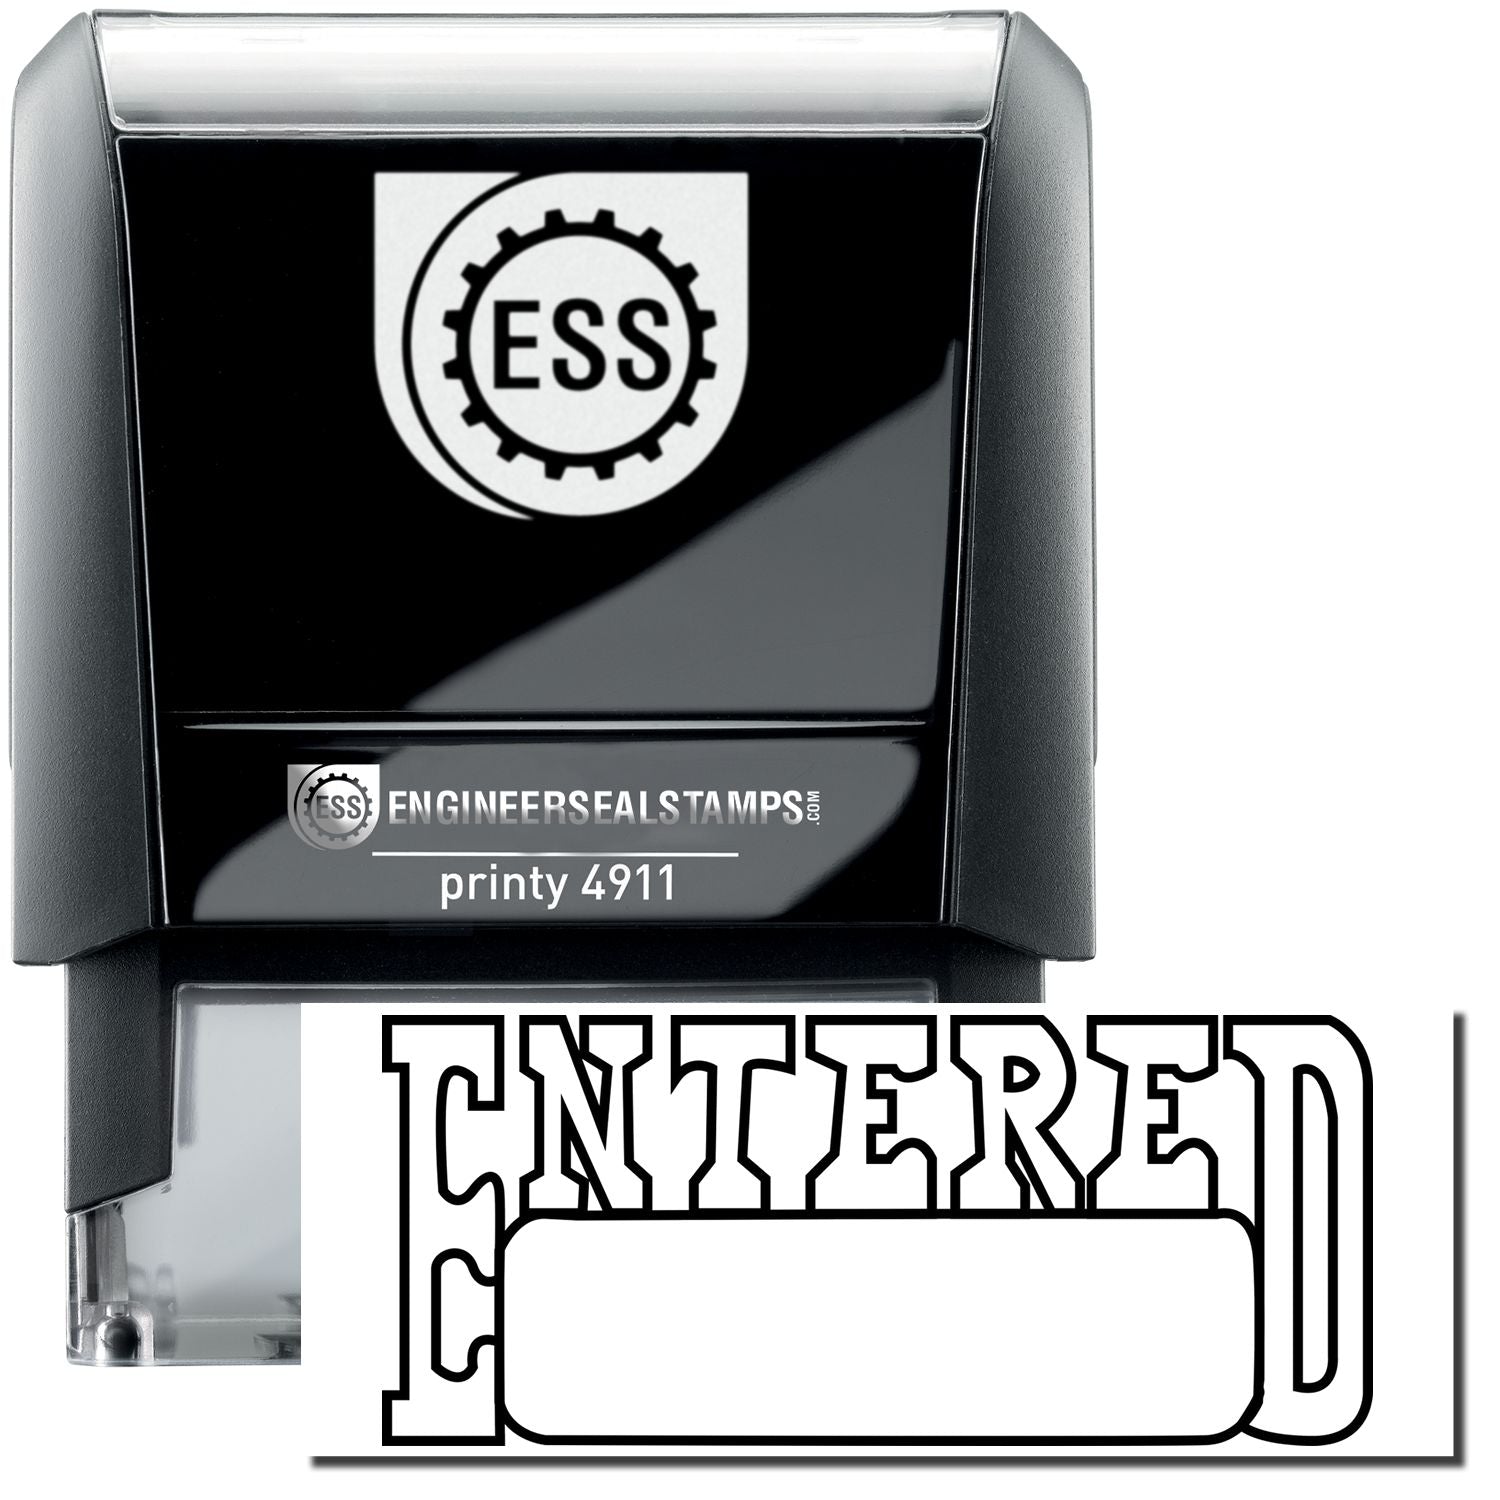 A self-inking stamp with a stamped image showing how the text "ENTERED" in a unique outline style with a date box under it is displayed after stamping.